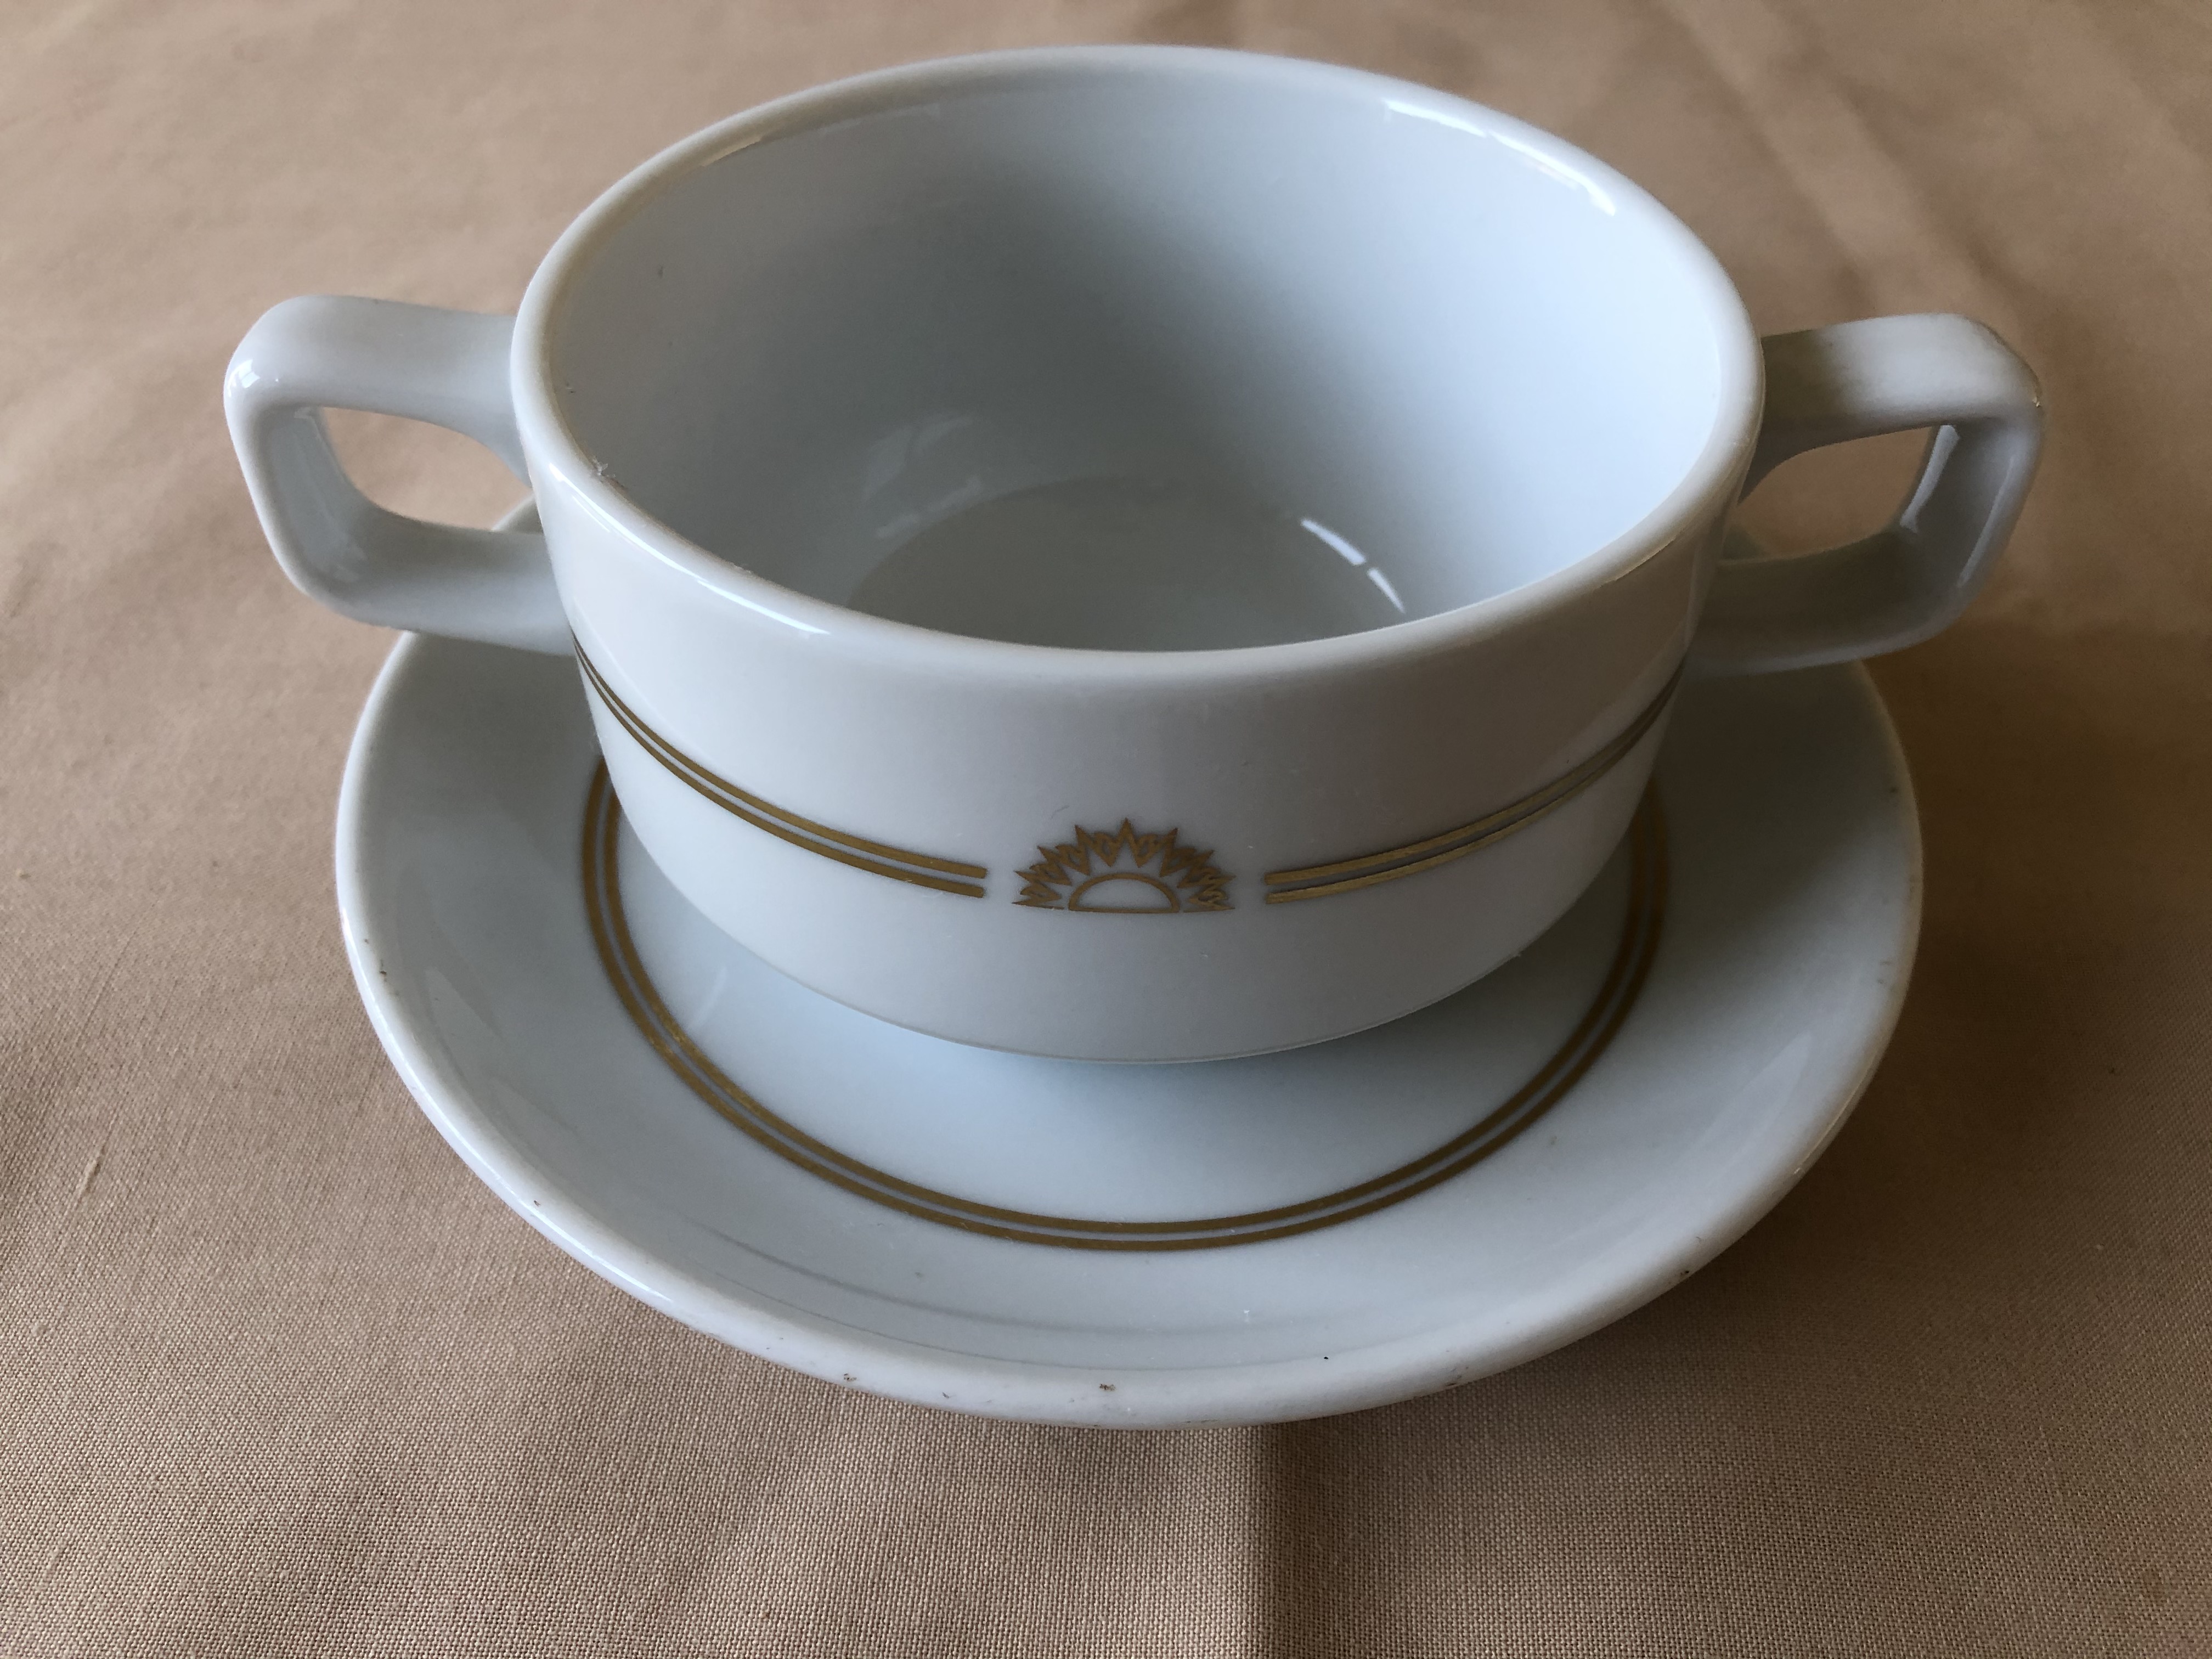 RARE TO FIND TWO HANDLED DINNER BOWL AND SAUCER FROM THE P&O VESSEL THE CANBERRA